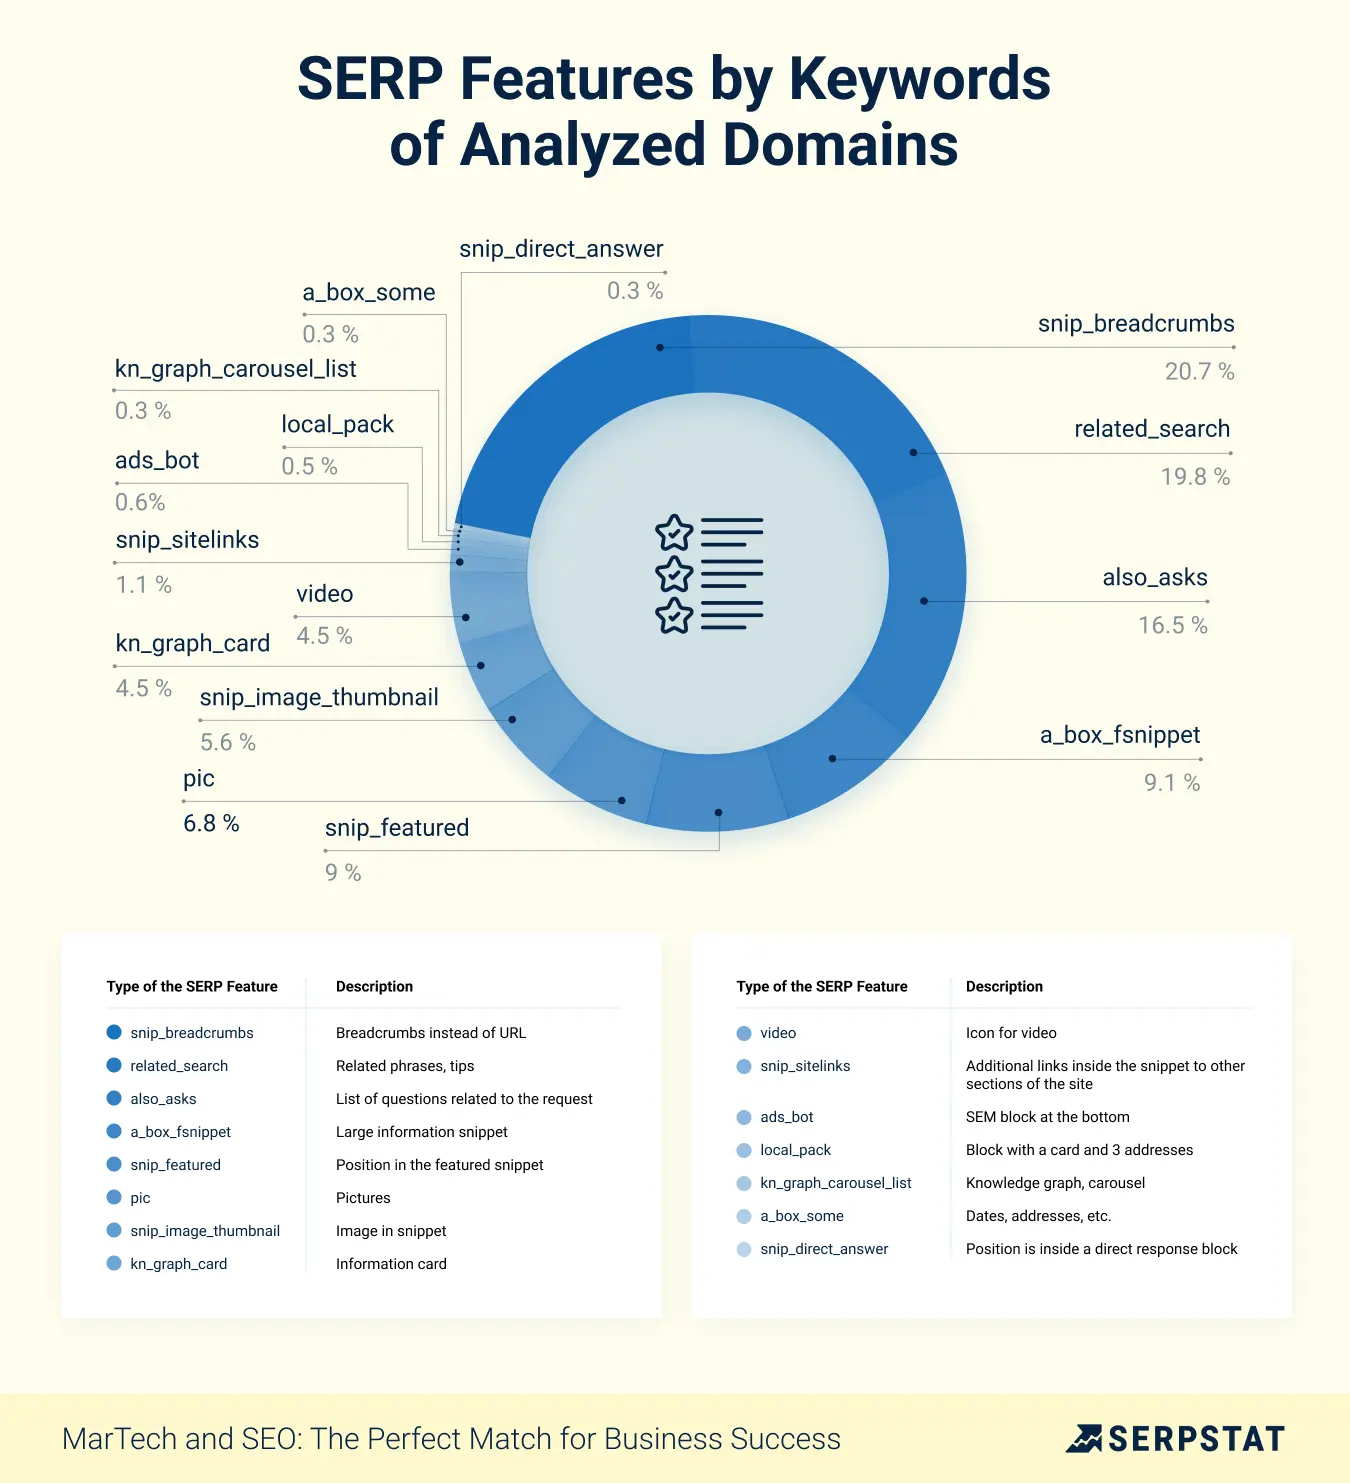 SERP Features by Keywords of Analyzed Domains